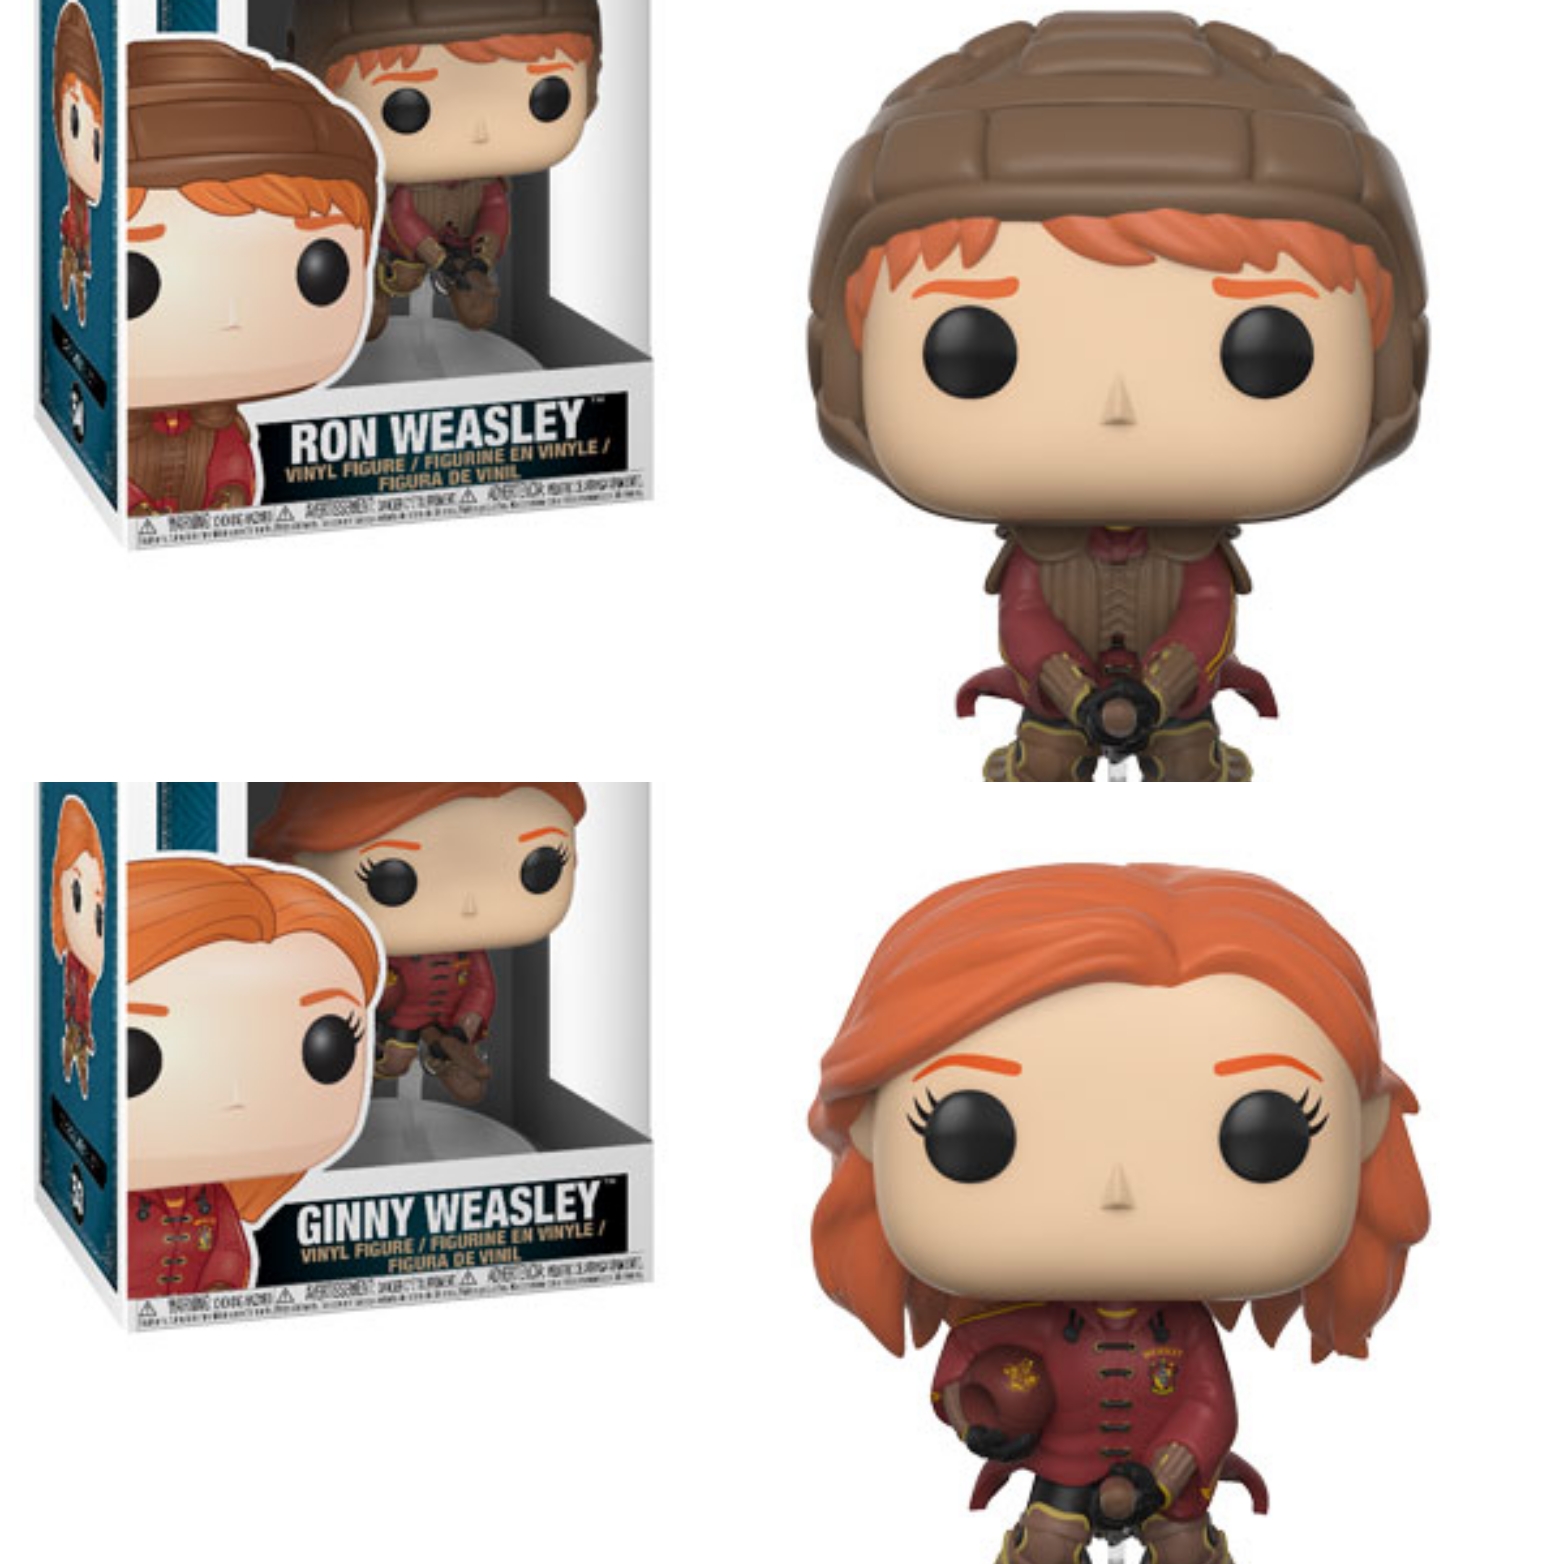 New Harry Potter Funko for 2018 - The 